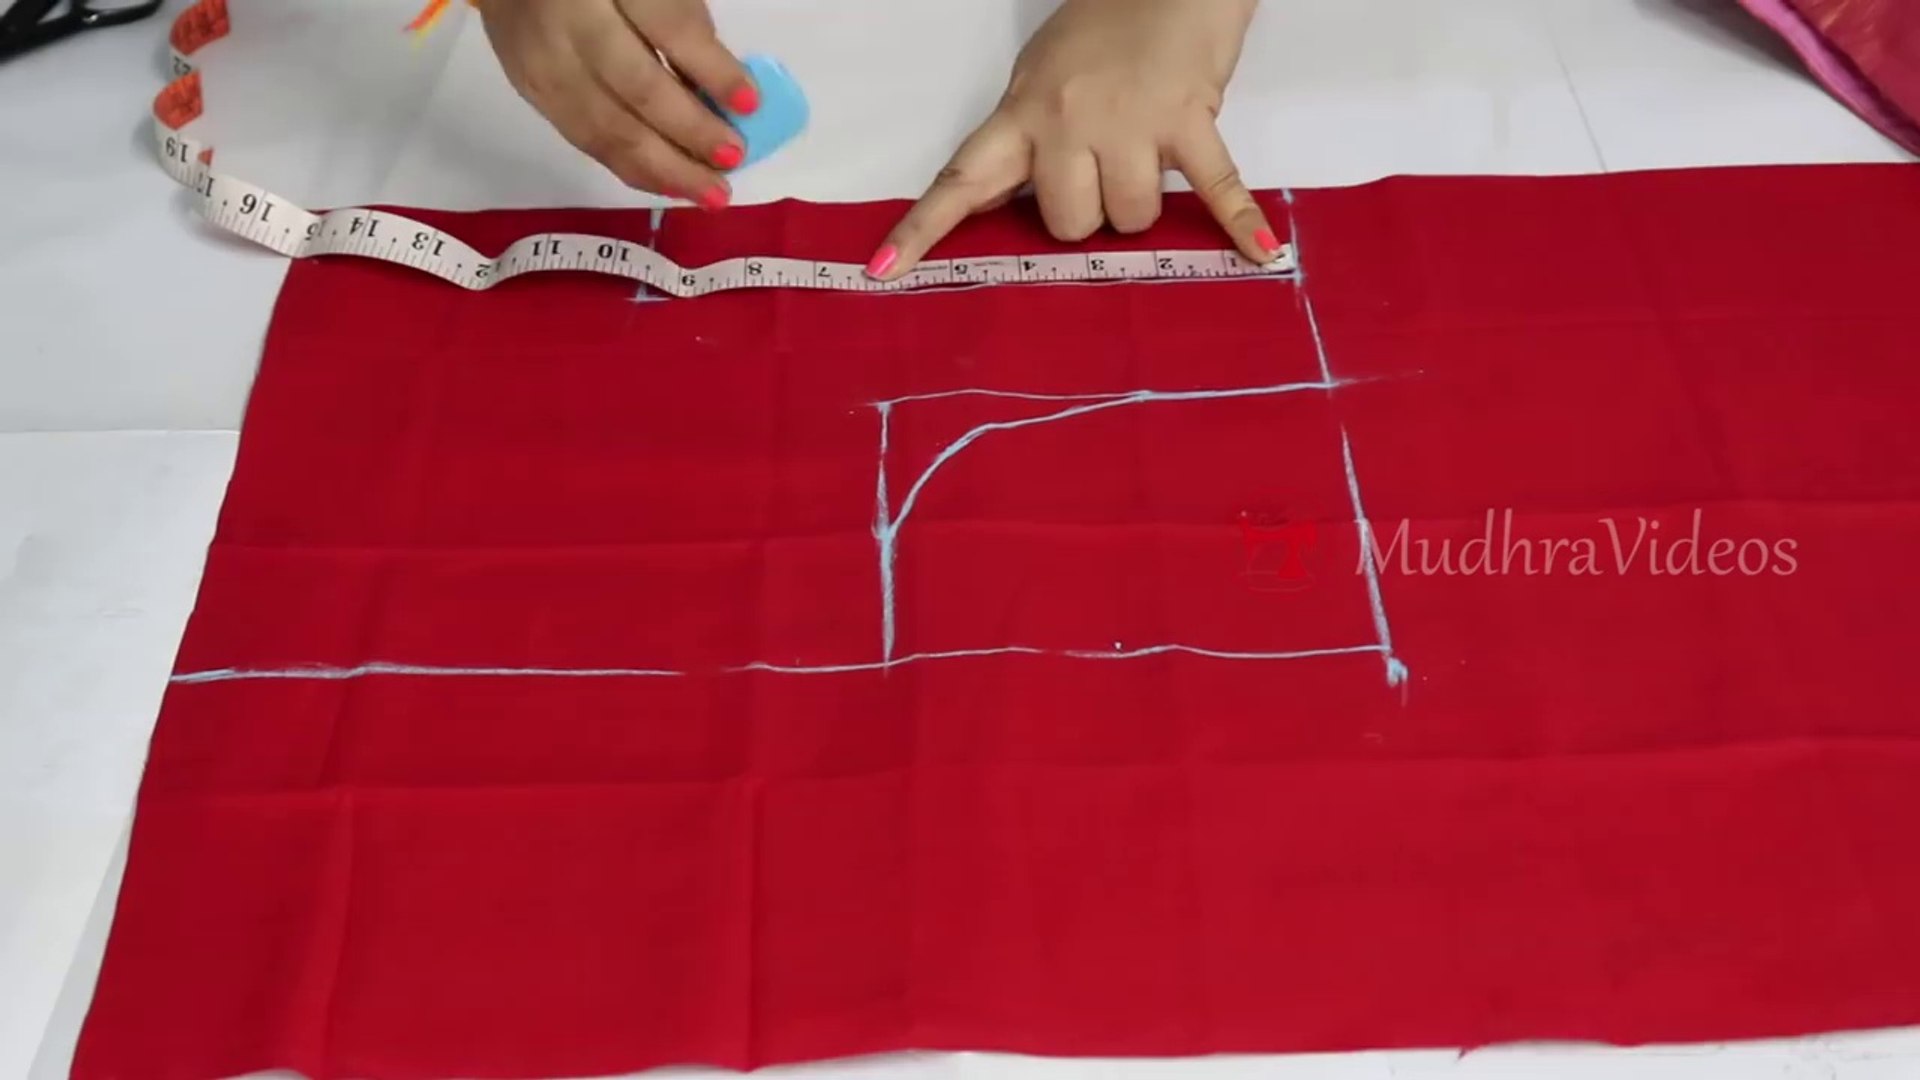 Blouse Cutting Very Clarity -- Mudhra videos Tailoring Beginners Class @ 1  - video Dailymotion